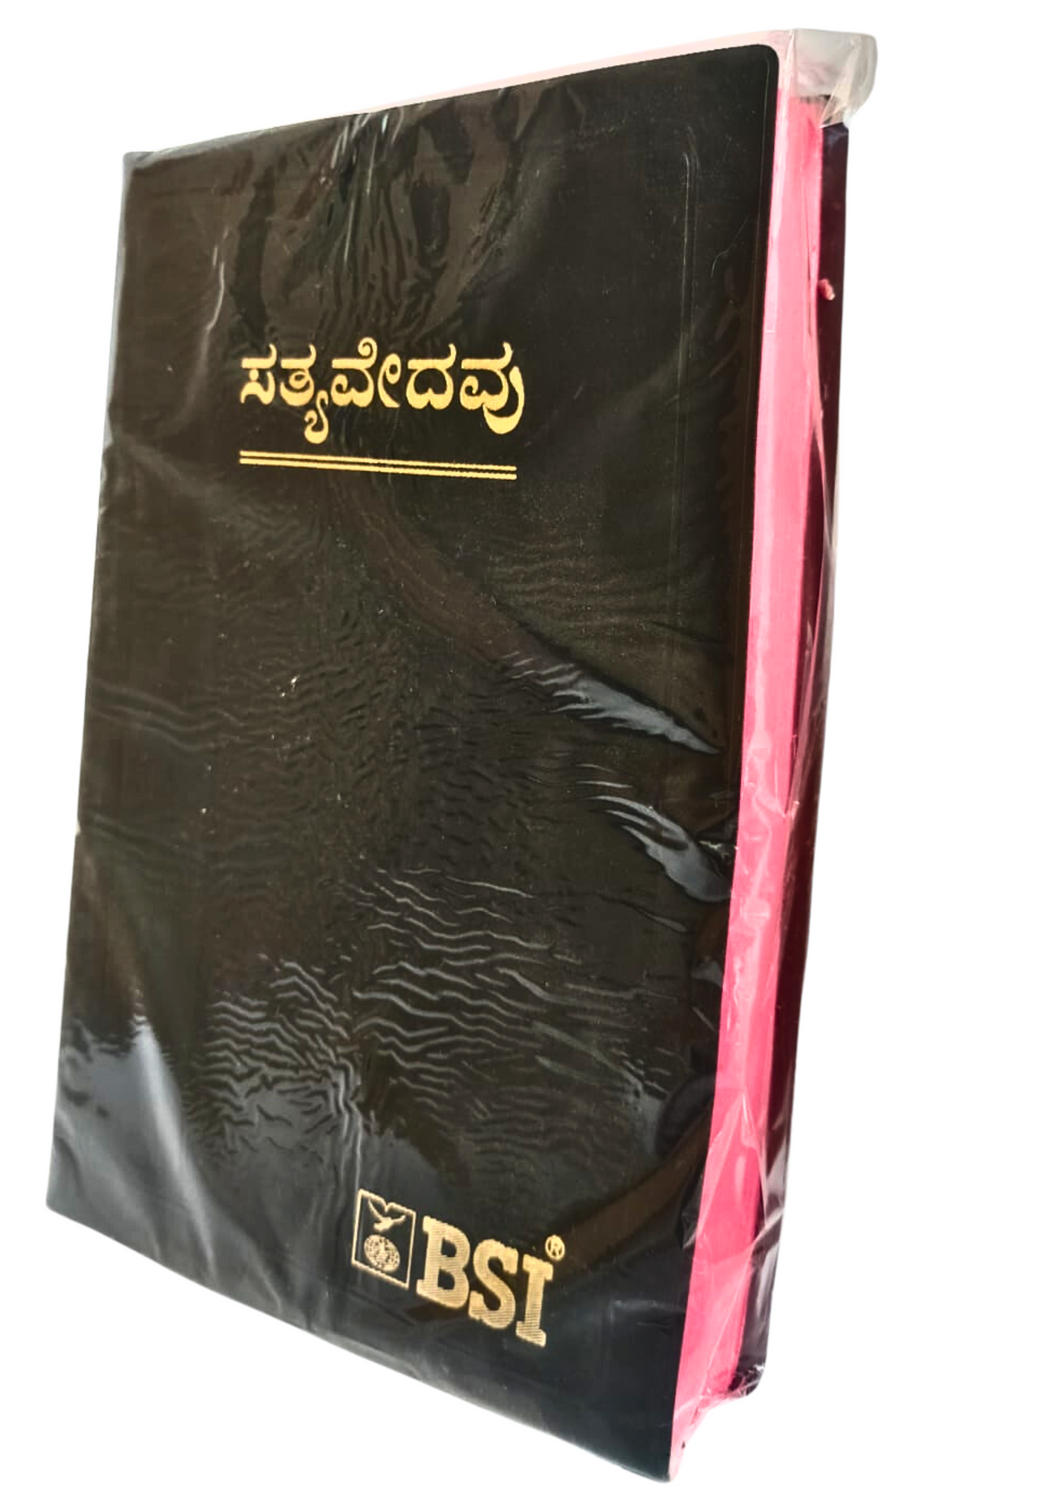 Kannada Holy Bible - BSI Version Containing Old and New Testament. Packing, Delivery Included